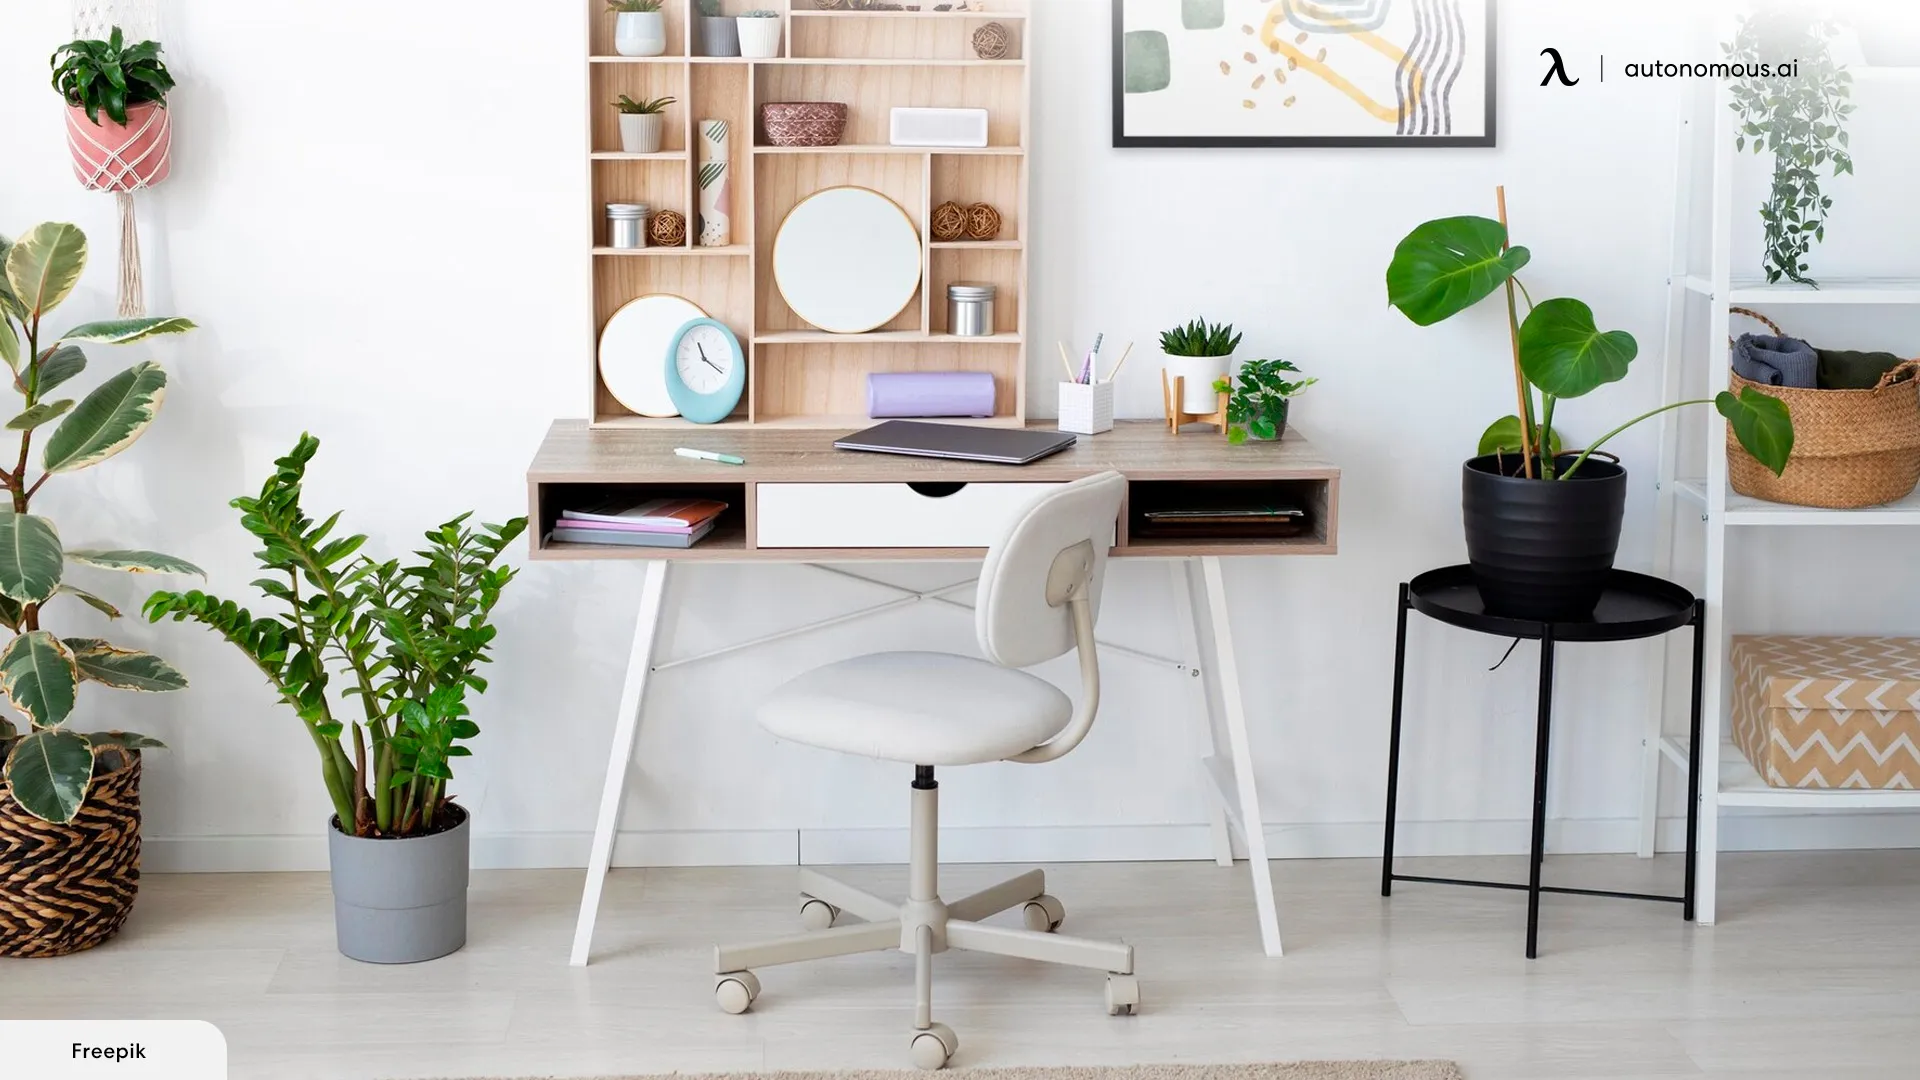 How to Build an ADHD-Friendly Home Office?